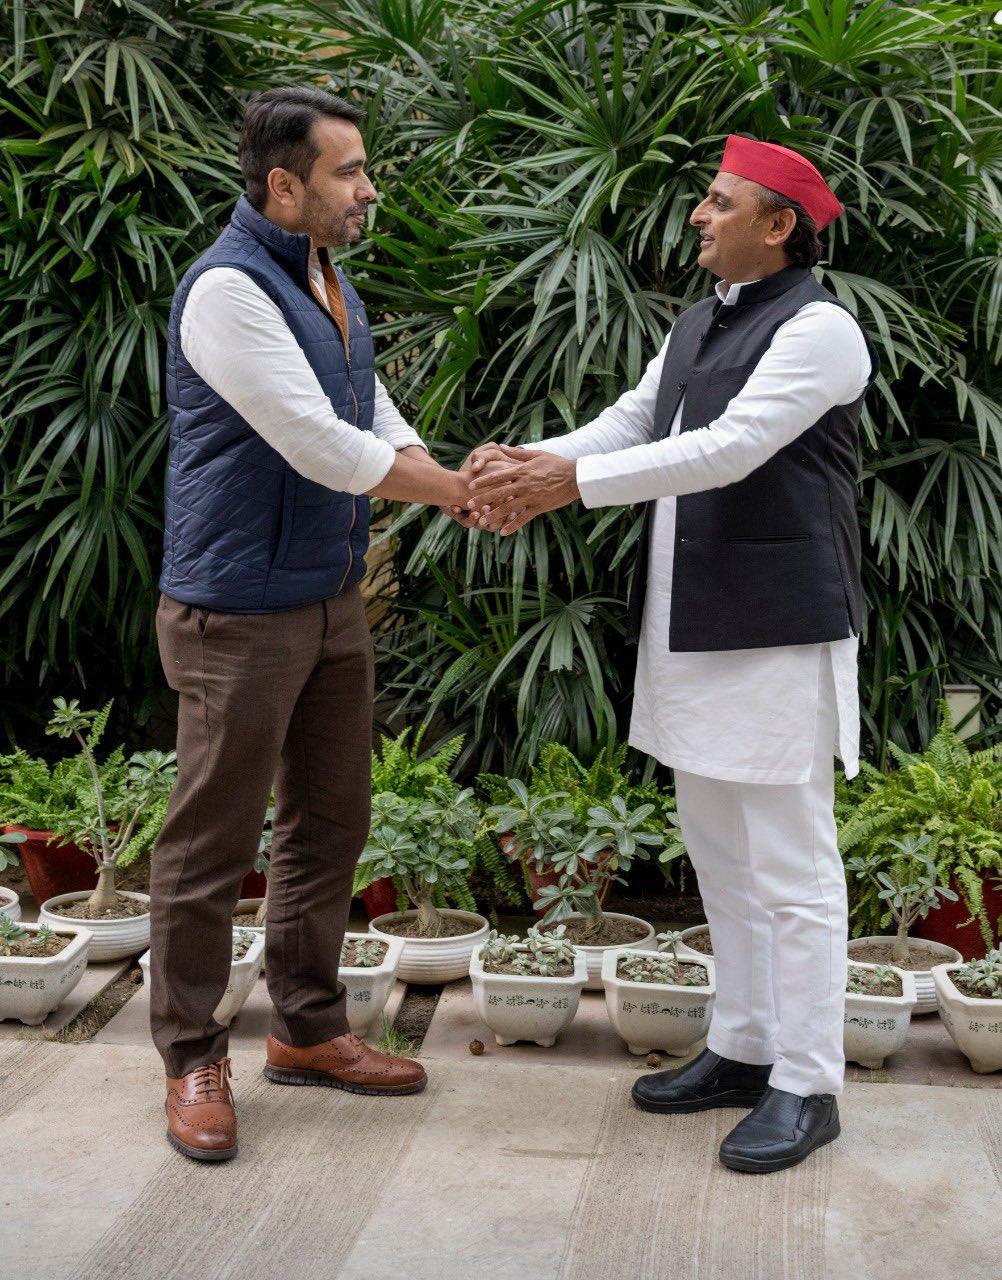 UP polls: Akhilesh Yadav, RLD chief meet in Lucknow, seat-sharing discussed